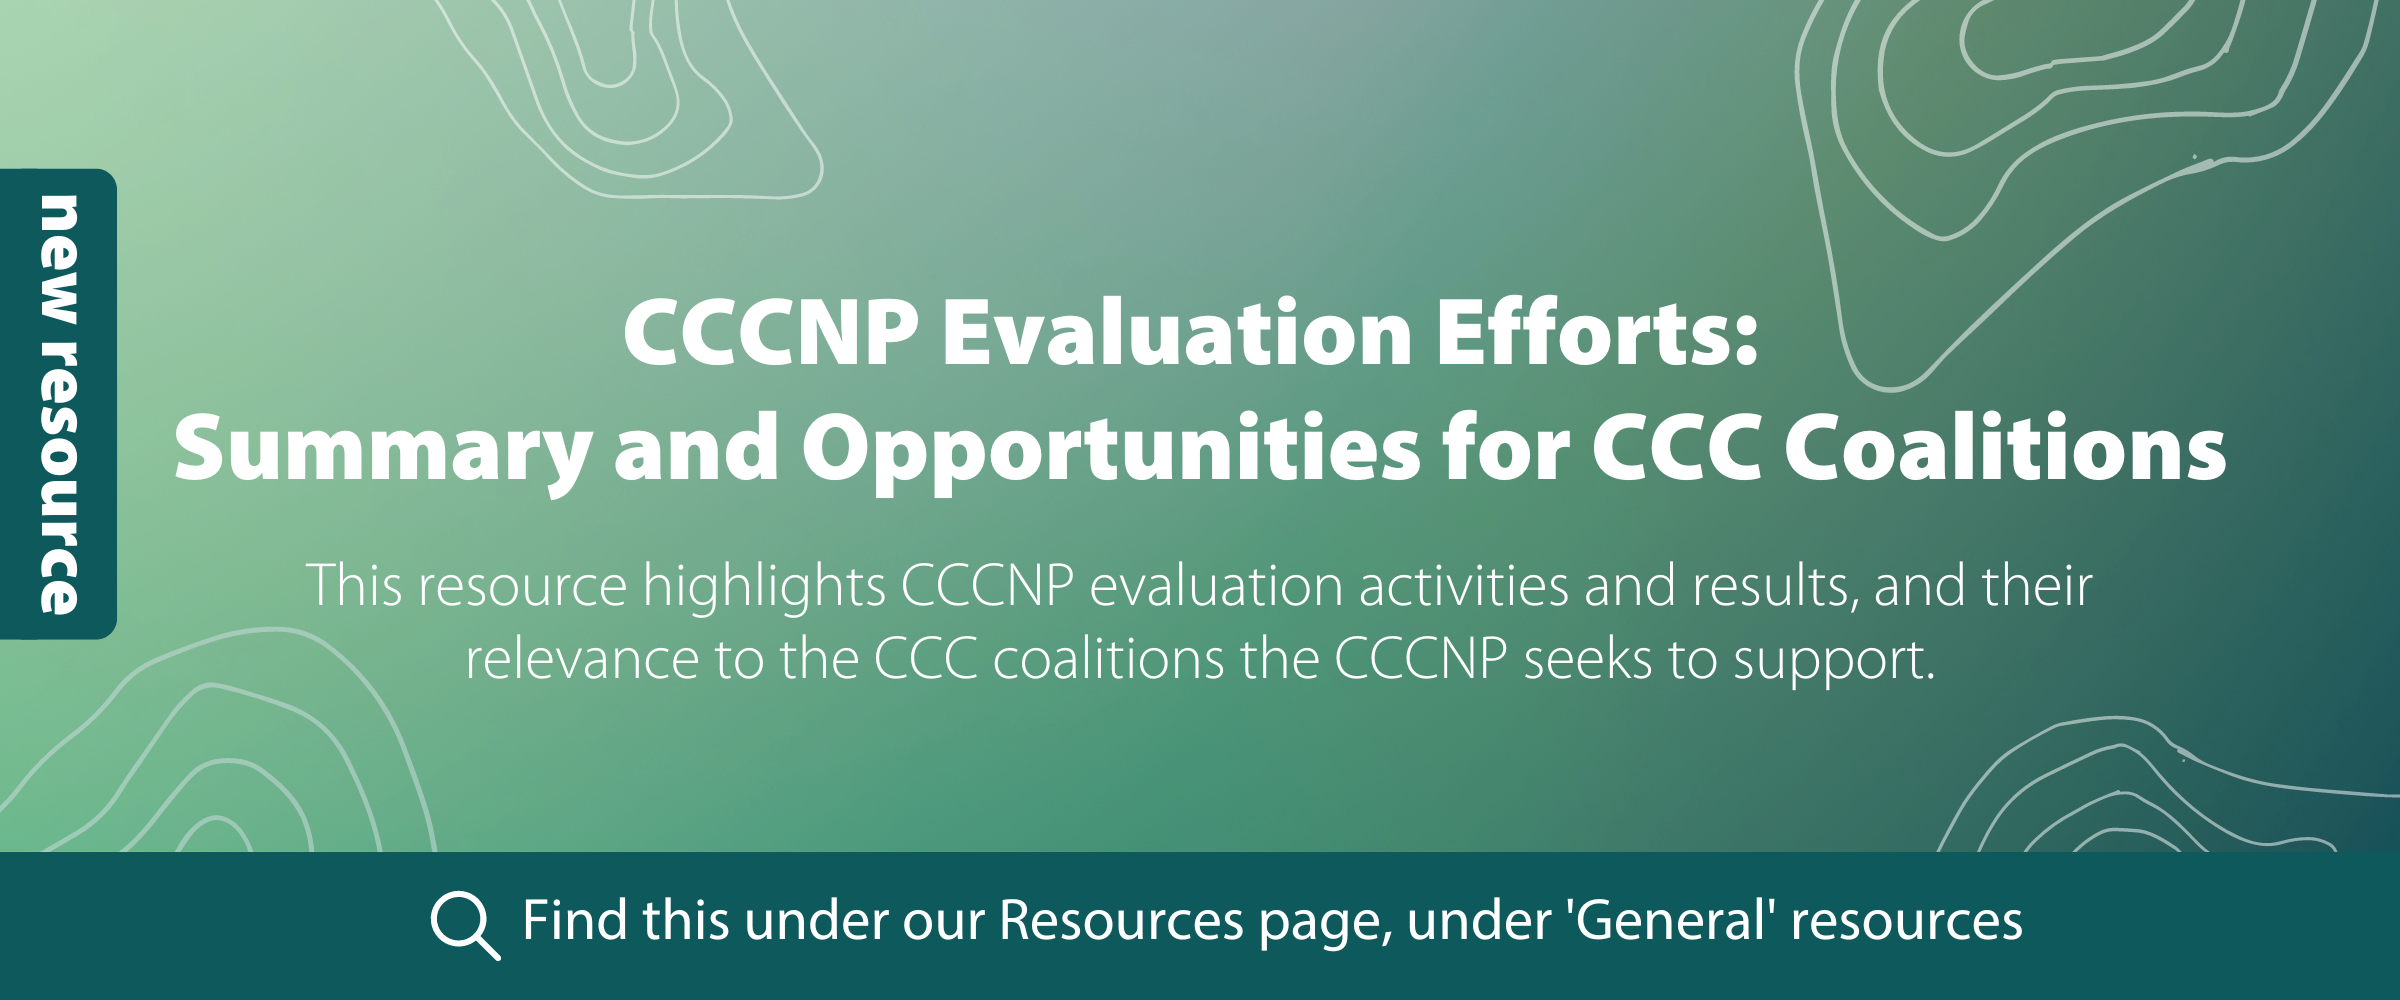 Notice of new evaluation resource. Click to open the Resources page.